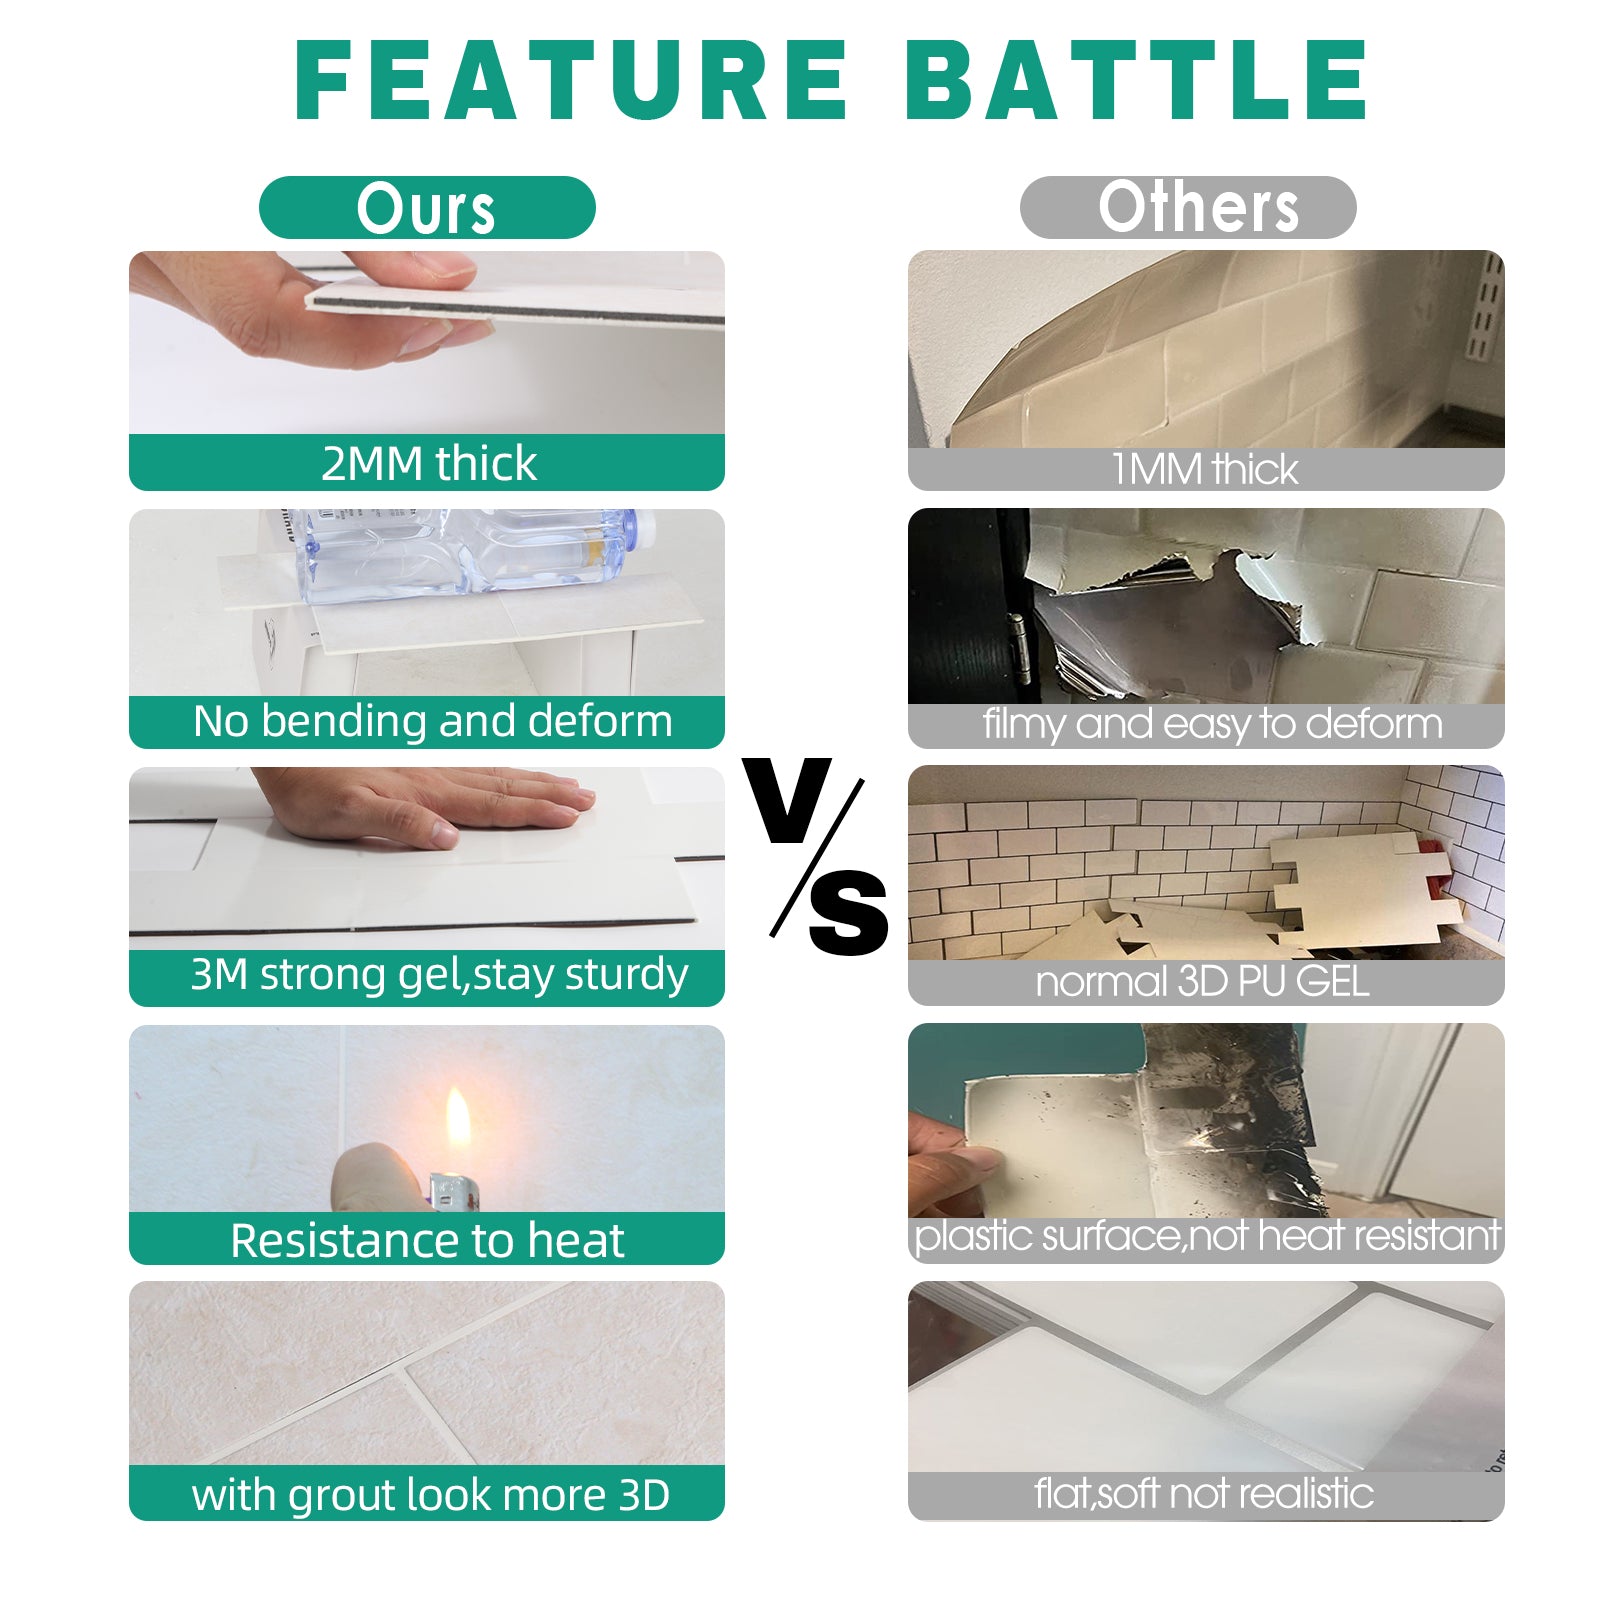 two brands of tile feature battle